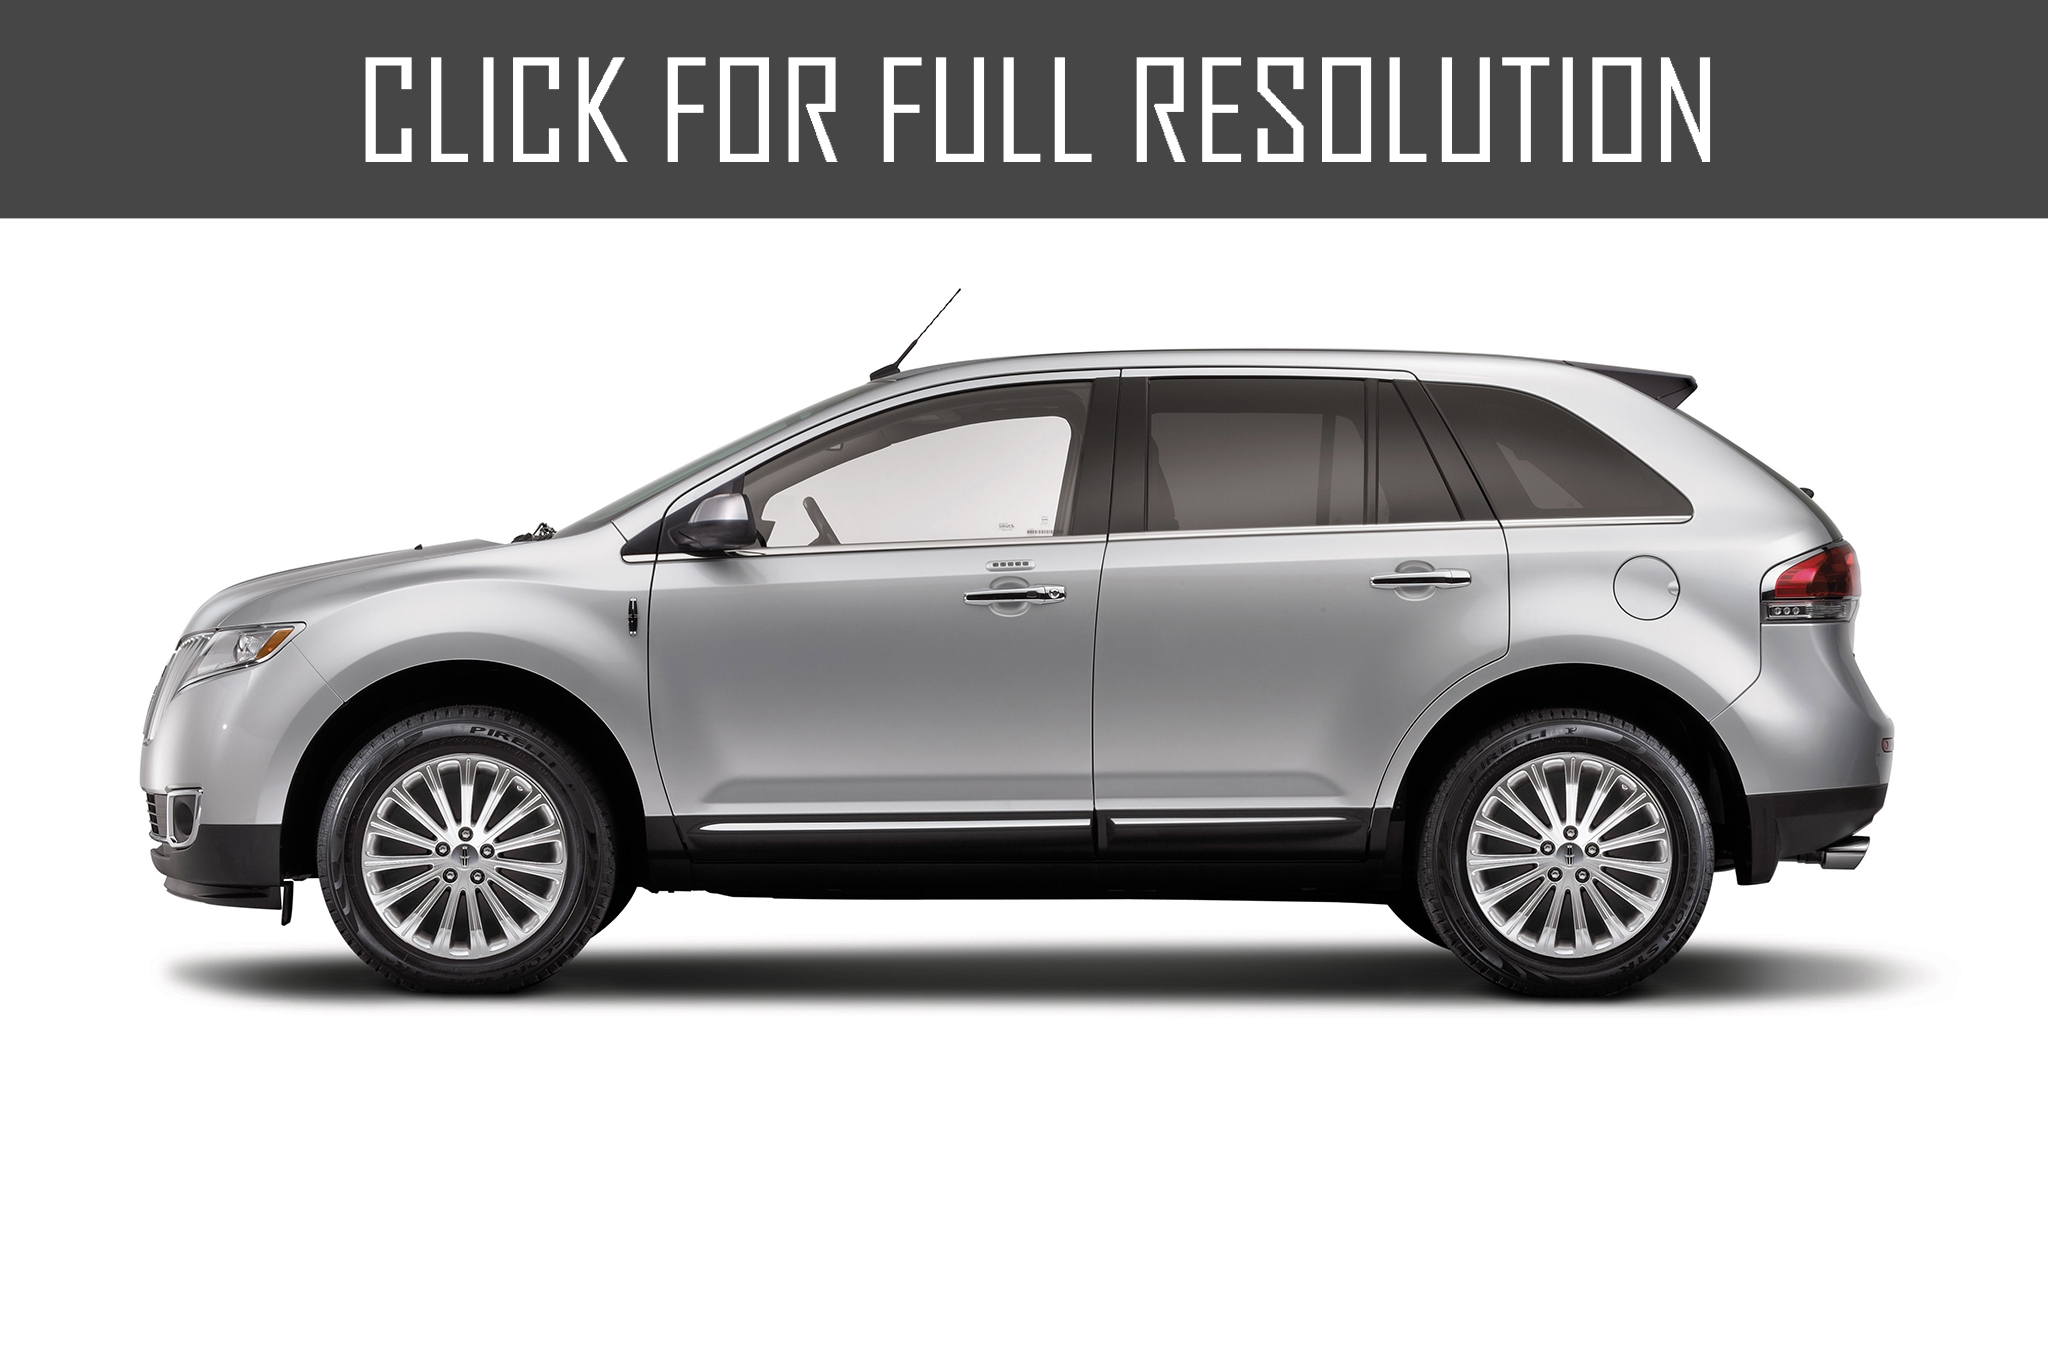 2013 Lincoln Mkx